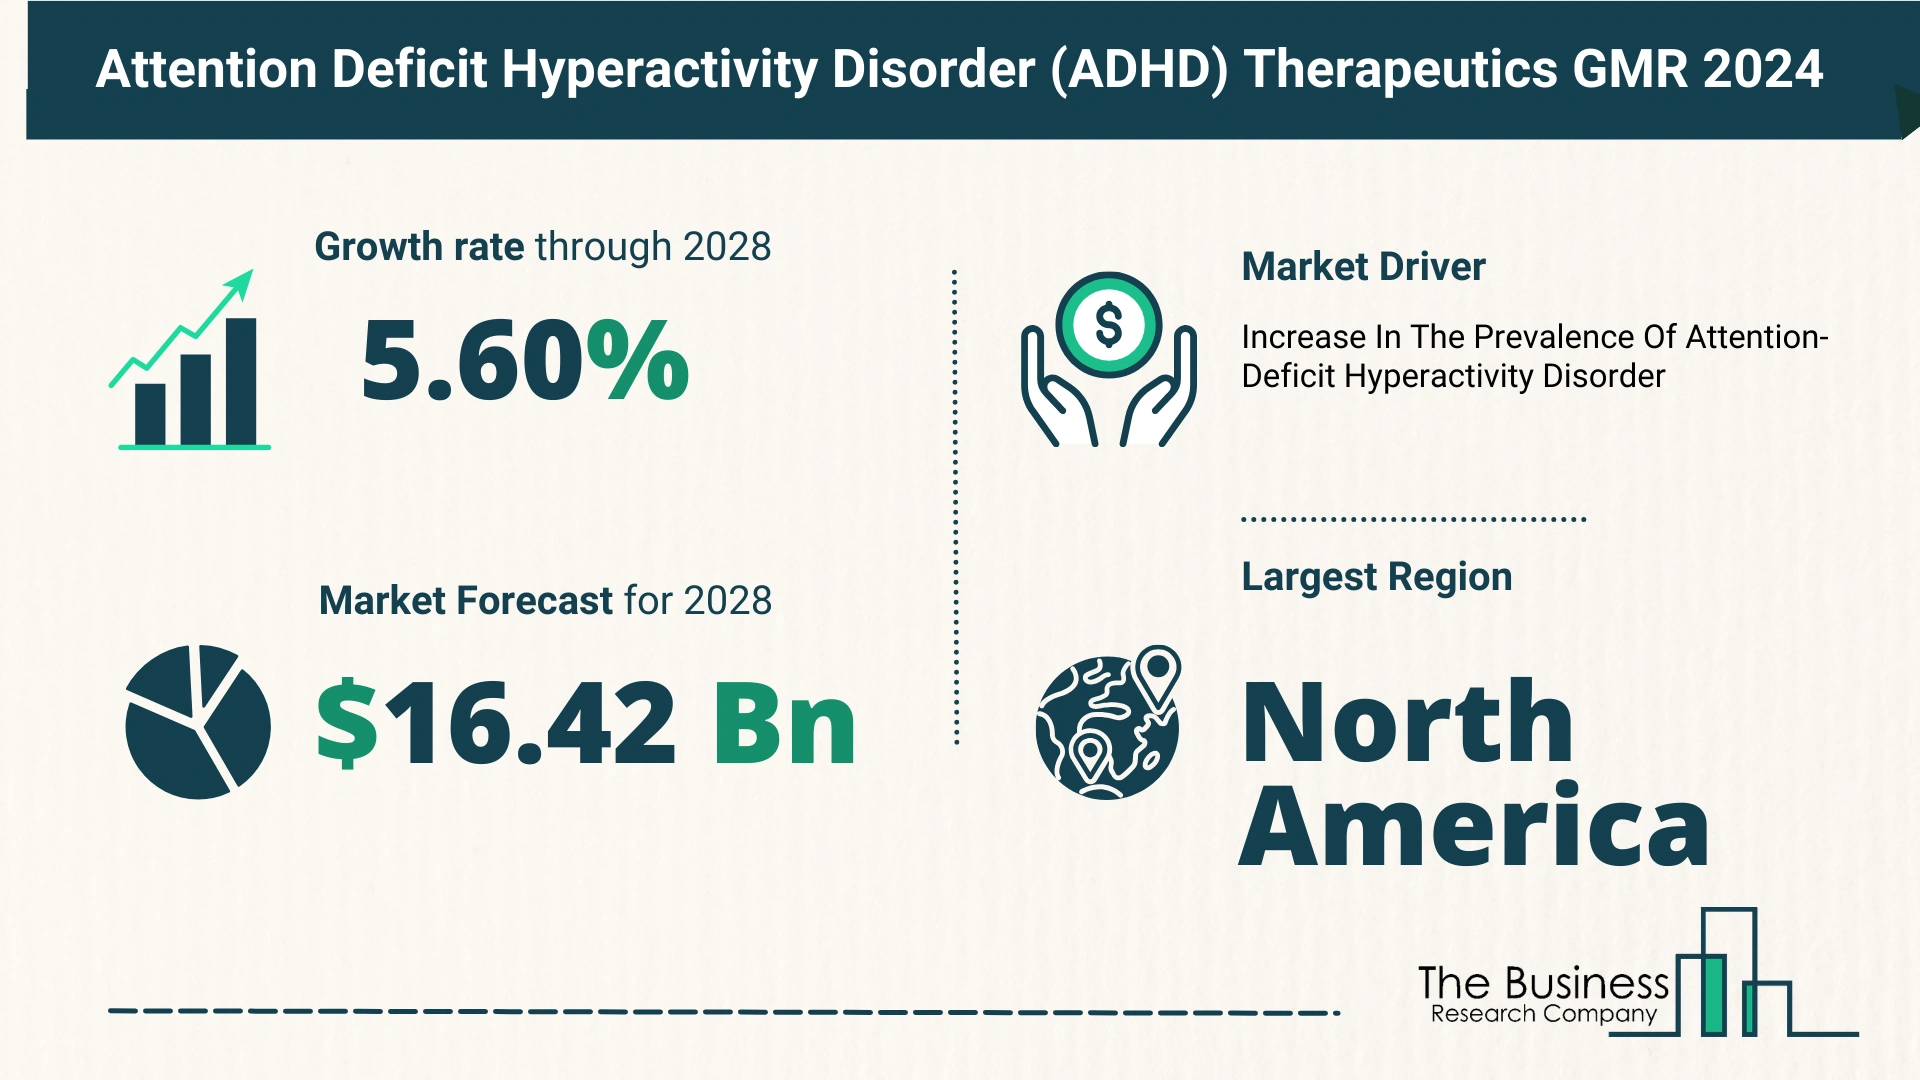 5 Key Insights On The Attention Deficit Hyperactivity Disorder (ADHD) Therapeutics Market 2024